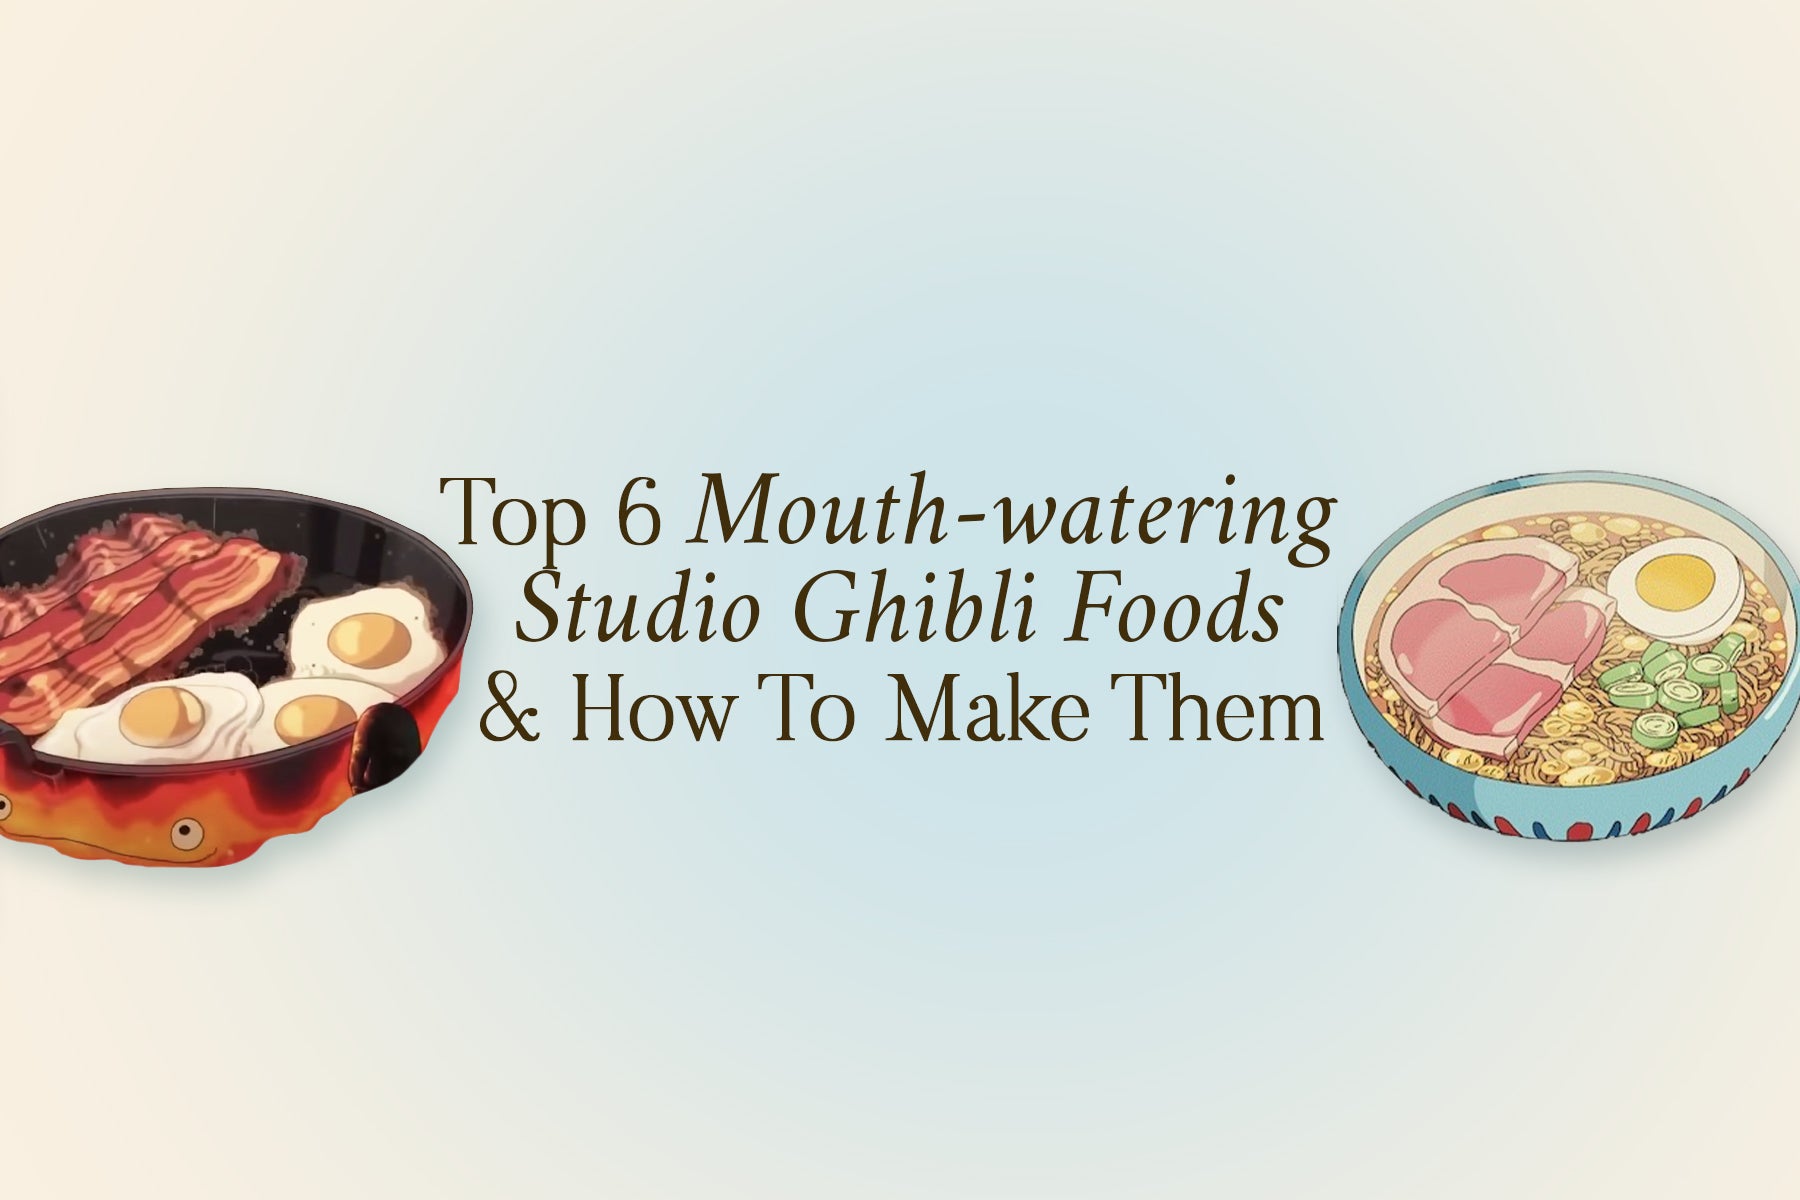 Top 6 Mouth-watering Studio Ghibli Foods & How To Make Them